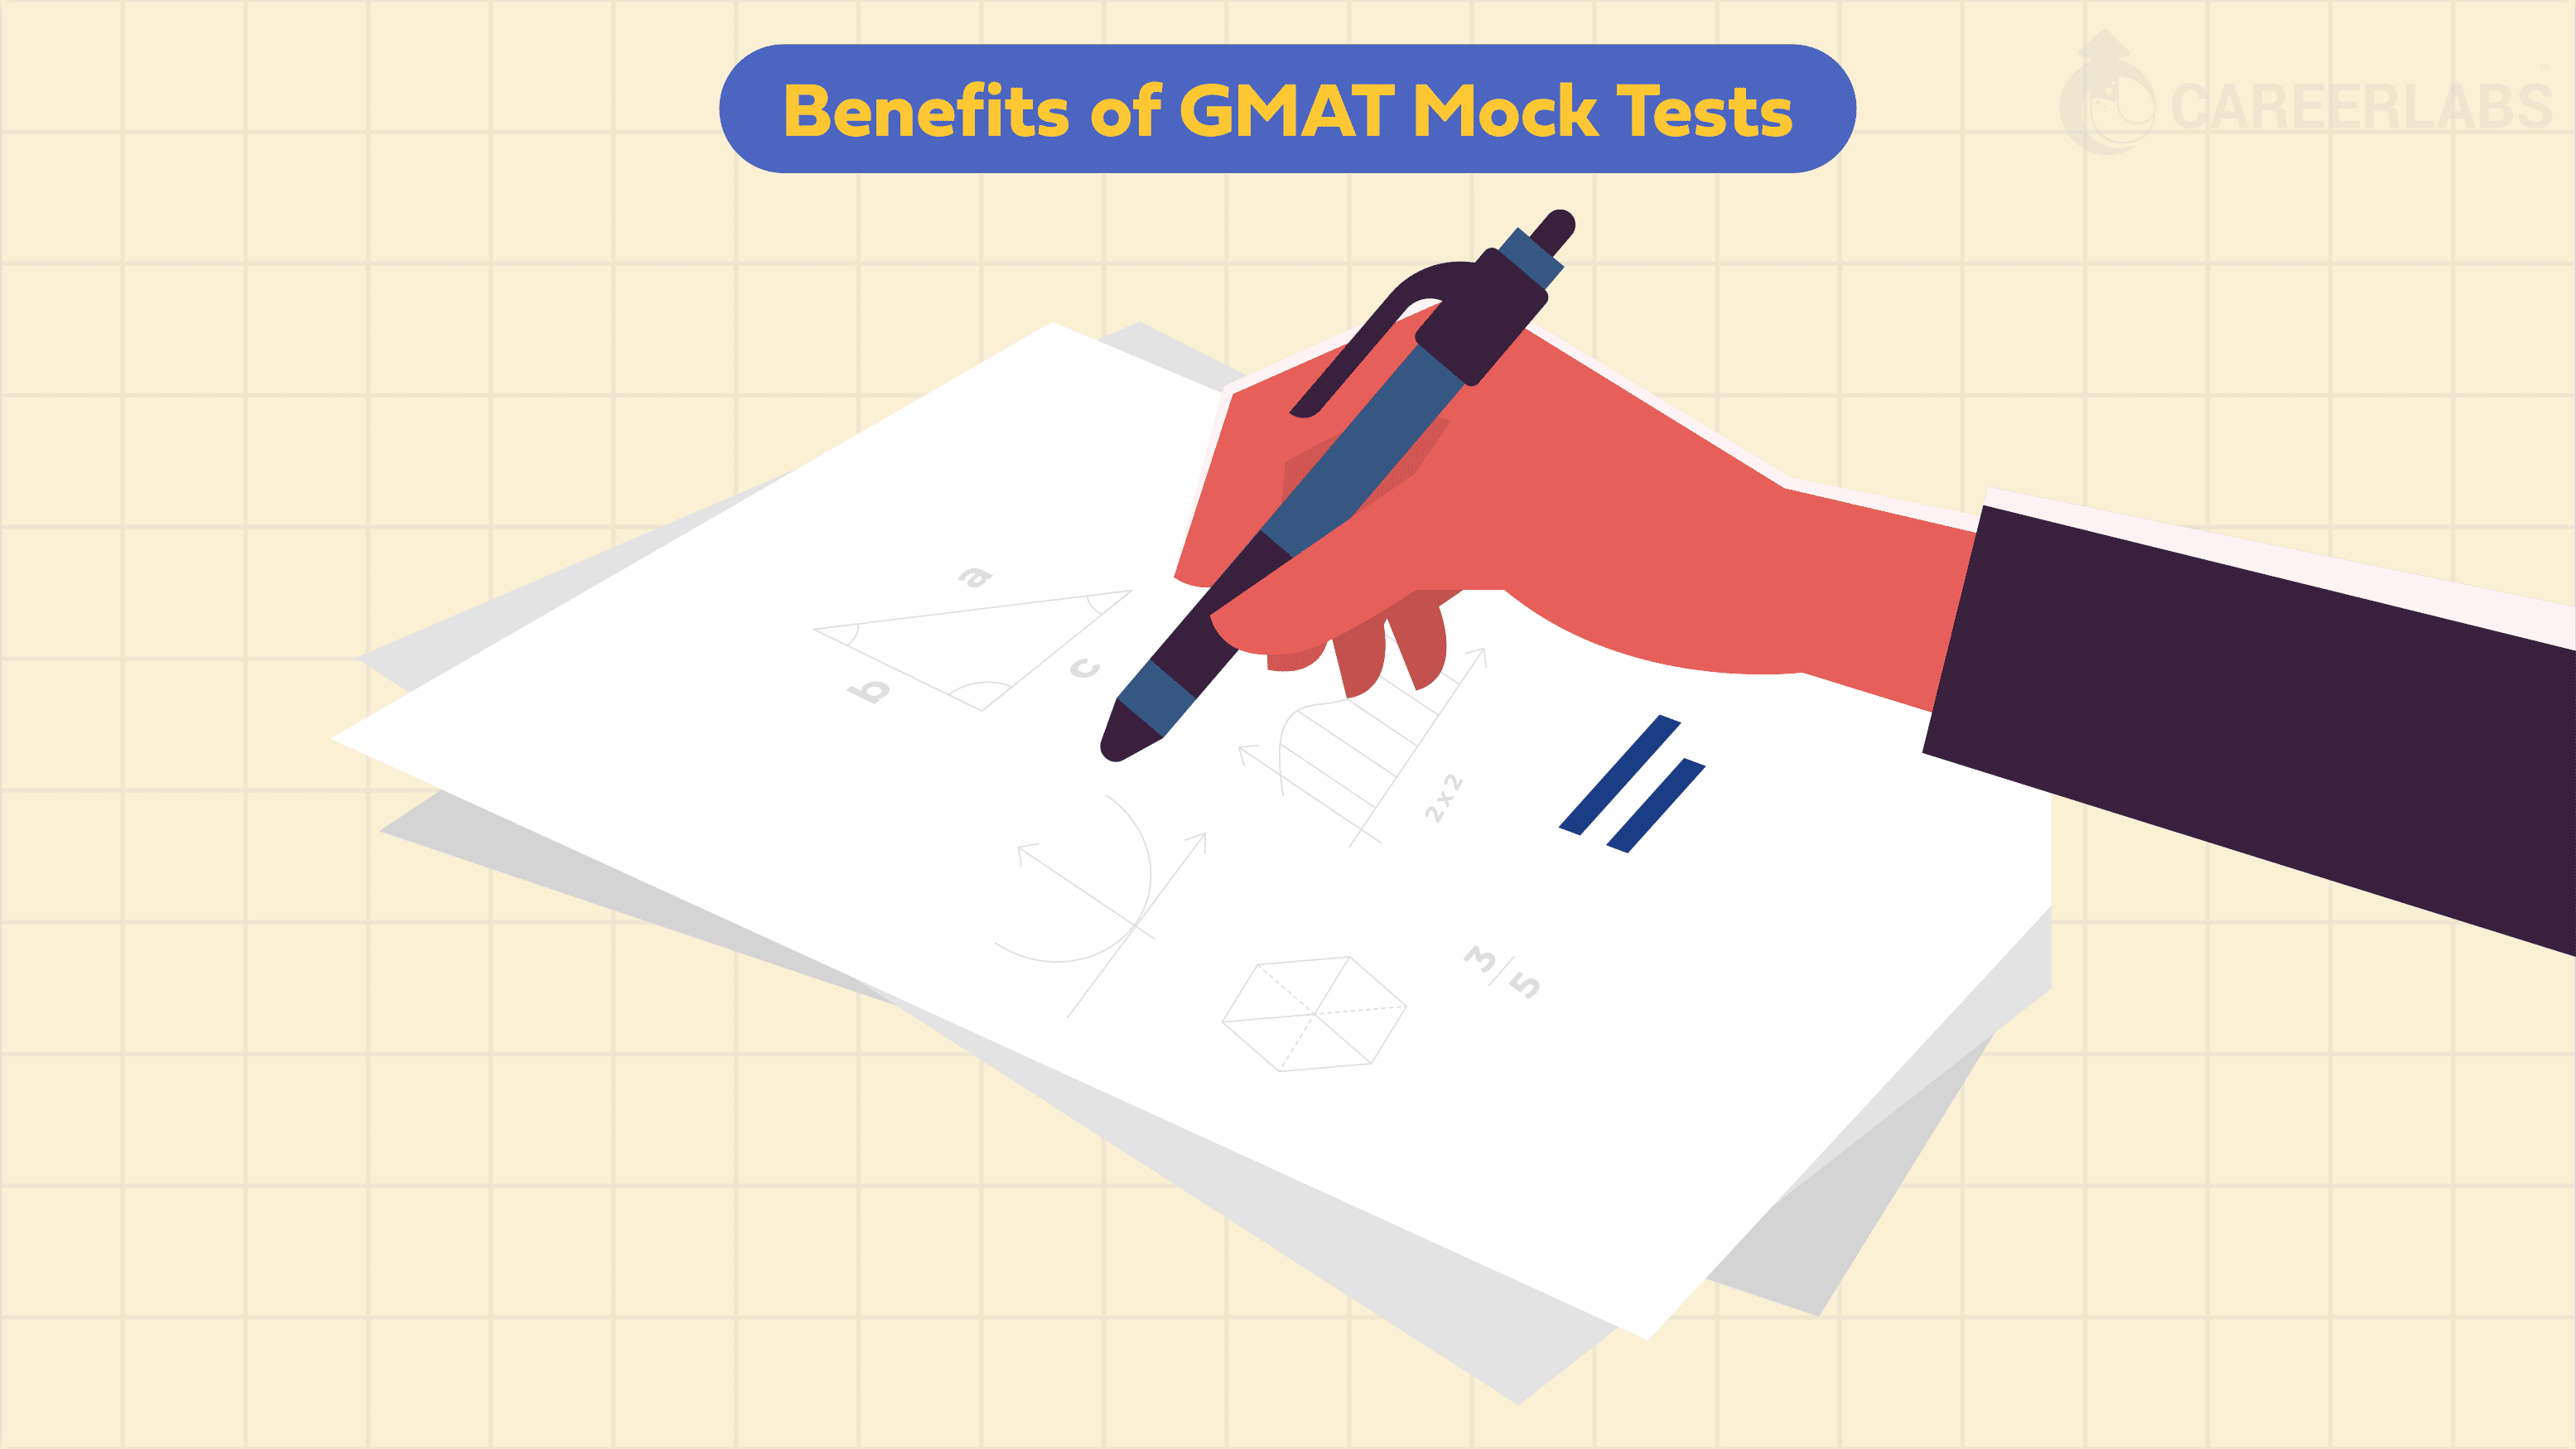 6 Vital Steps to Make the Most of GMAT Mock Tests